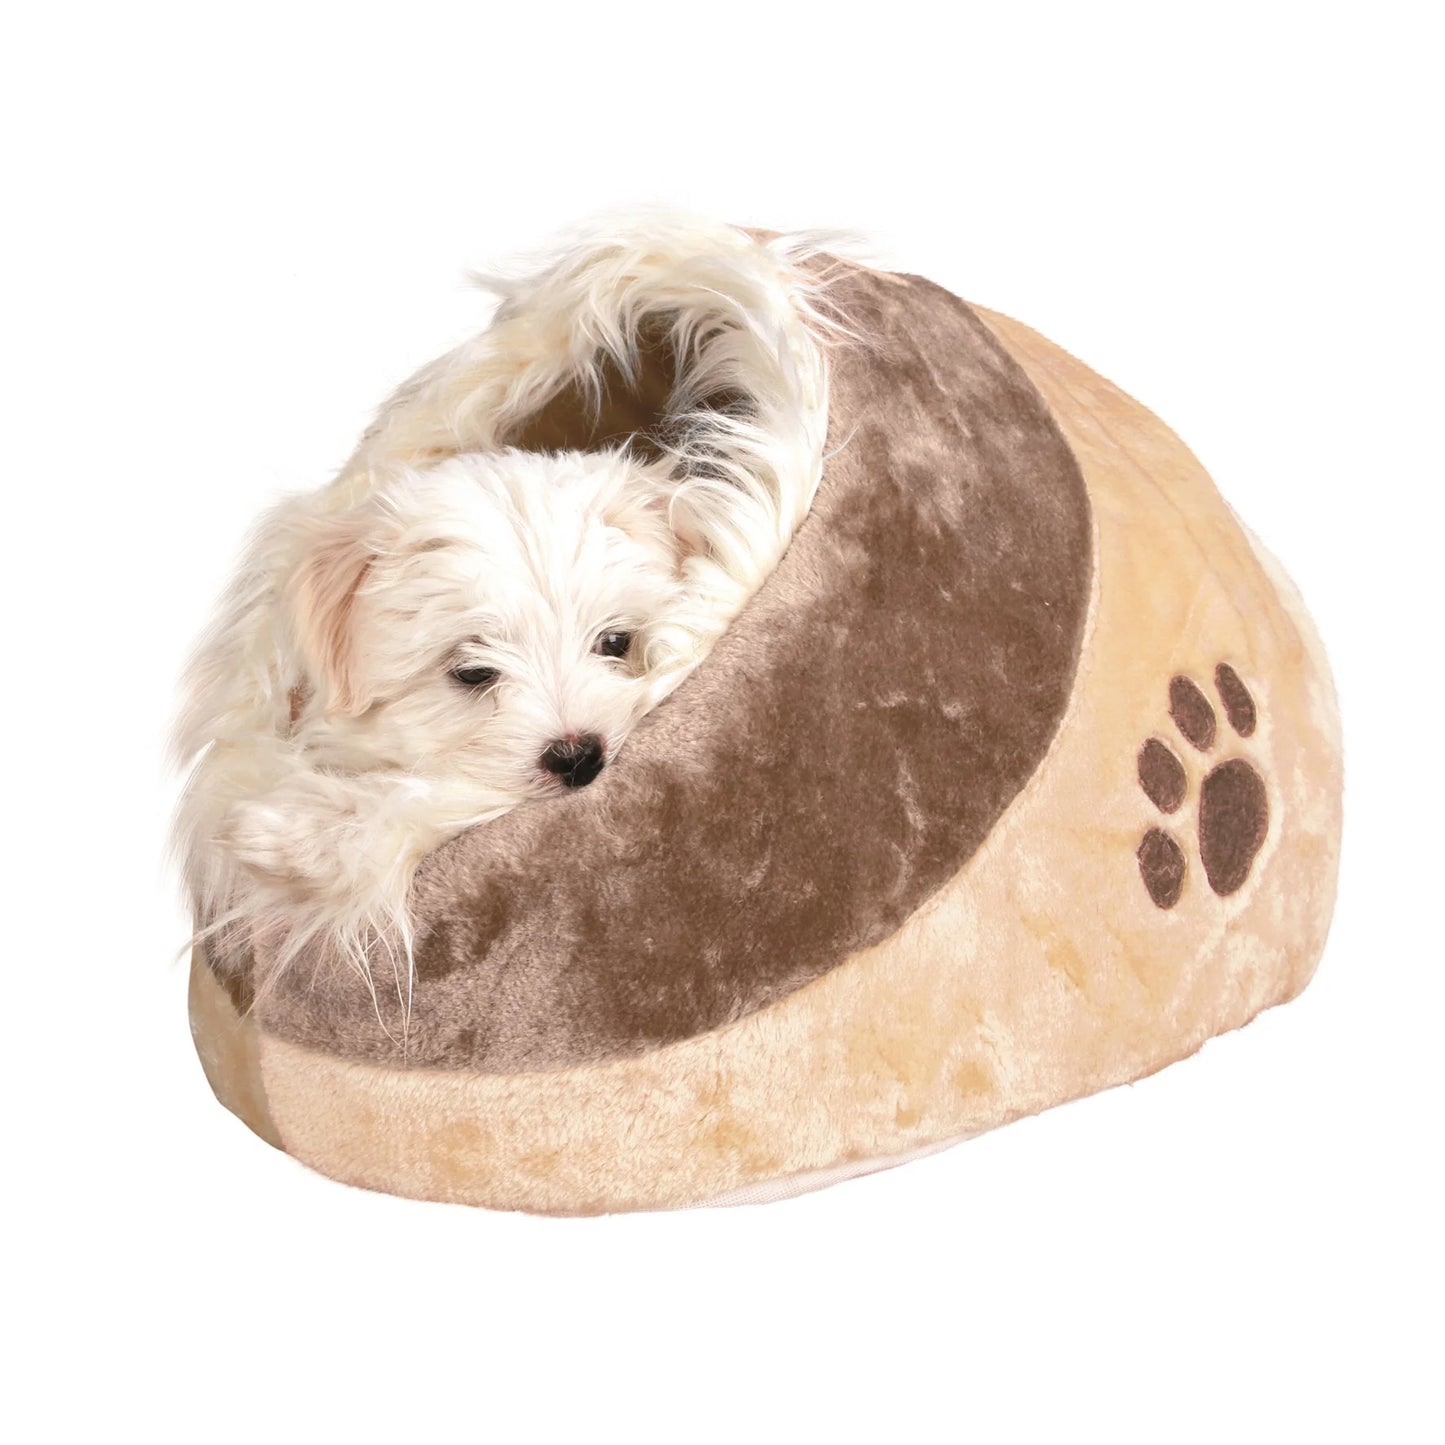 Trixie Minou Cuddly Cave Dogs & Cats Bed